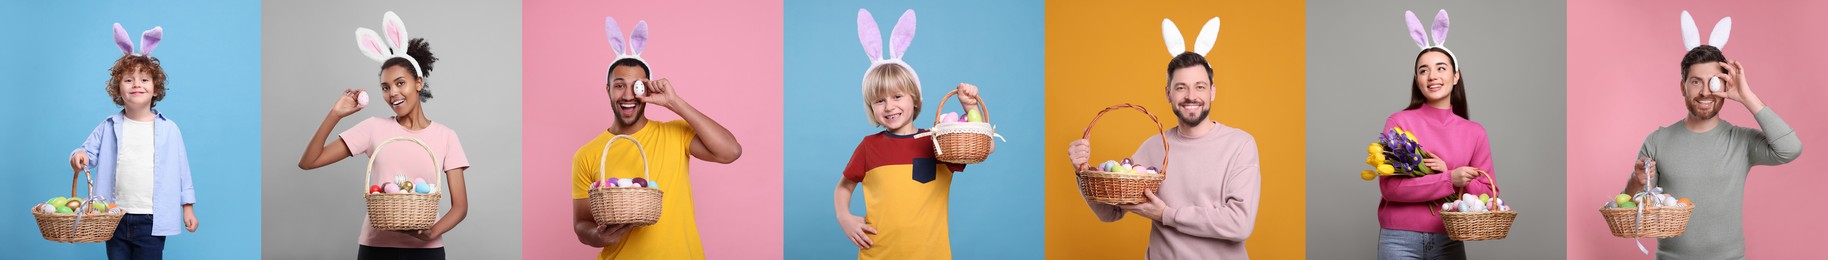 Photos of people with Easter eggs and bunny ears headbands on different color backgrounds. Collage design